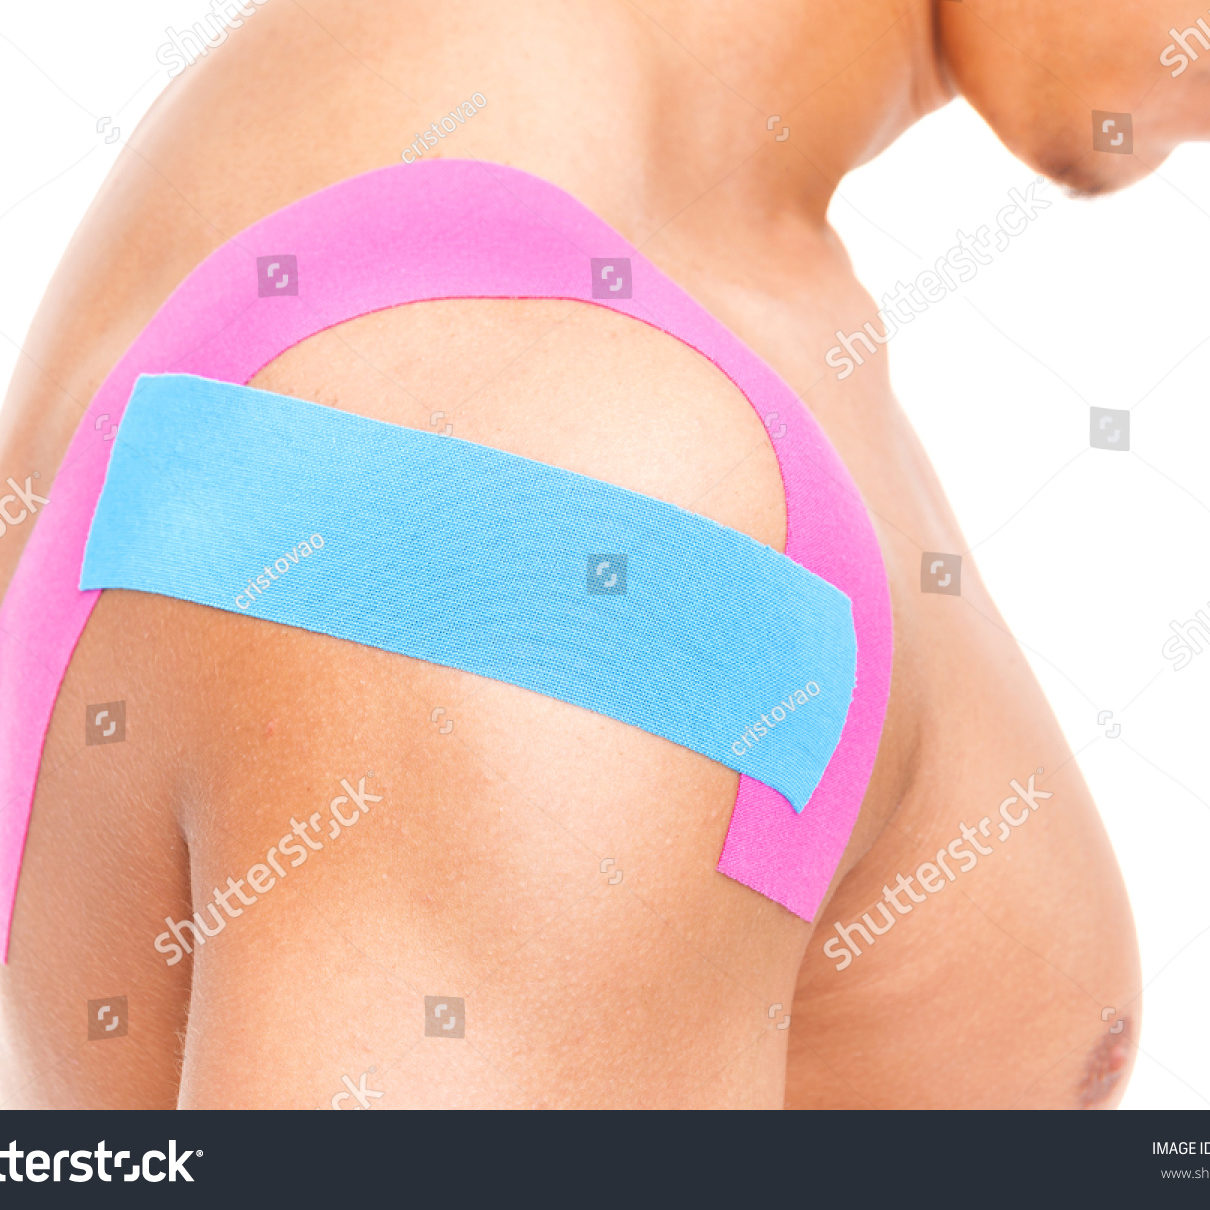 stock-photo-muscular-man-with-kinesiotaping-on-the-shoulder-isolated-on-white-background-421760977